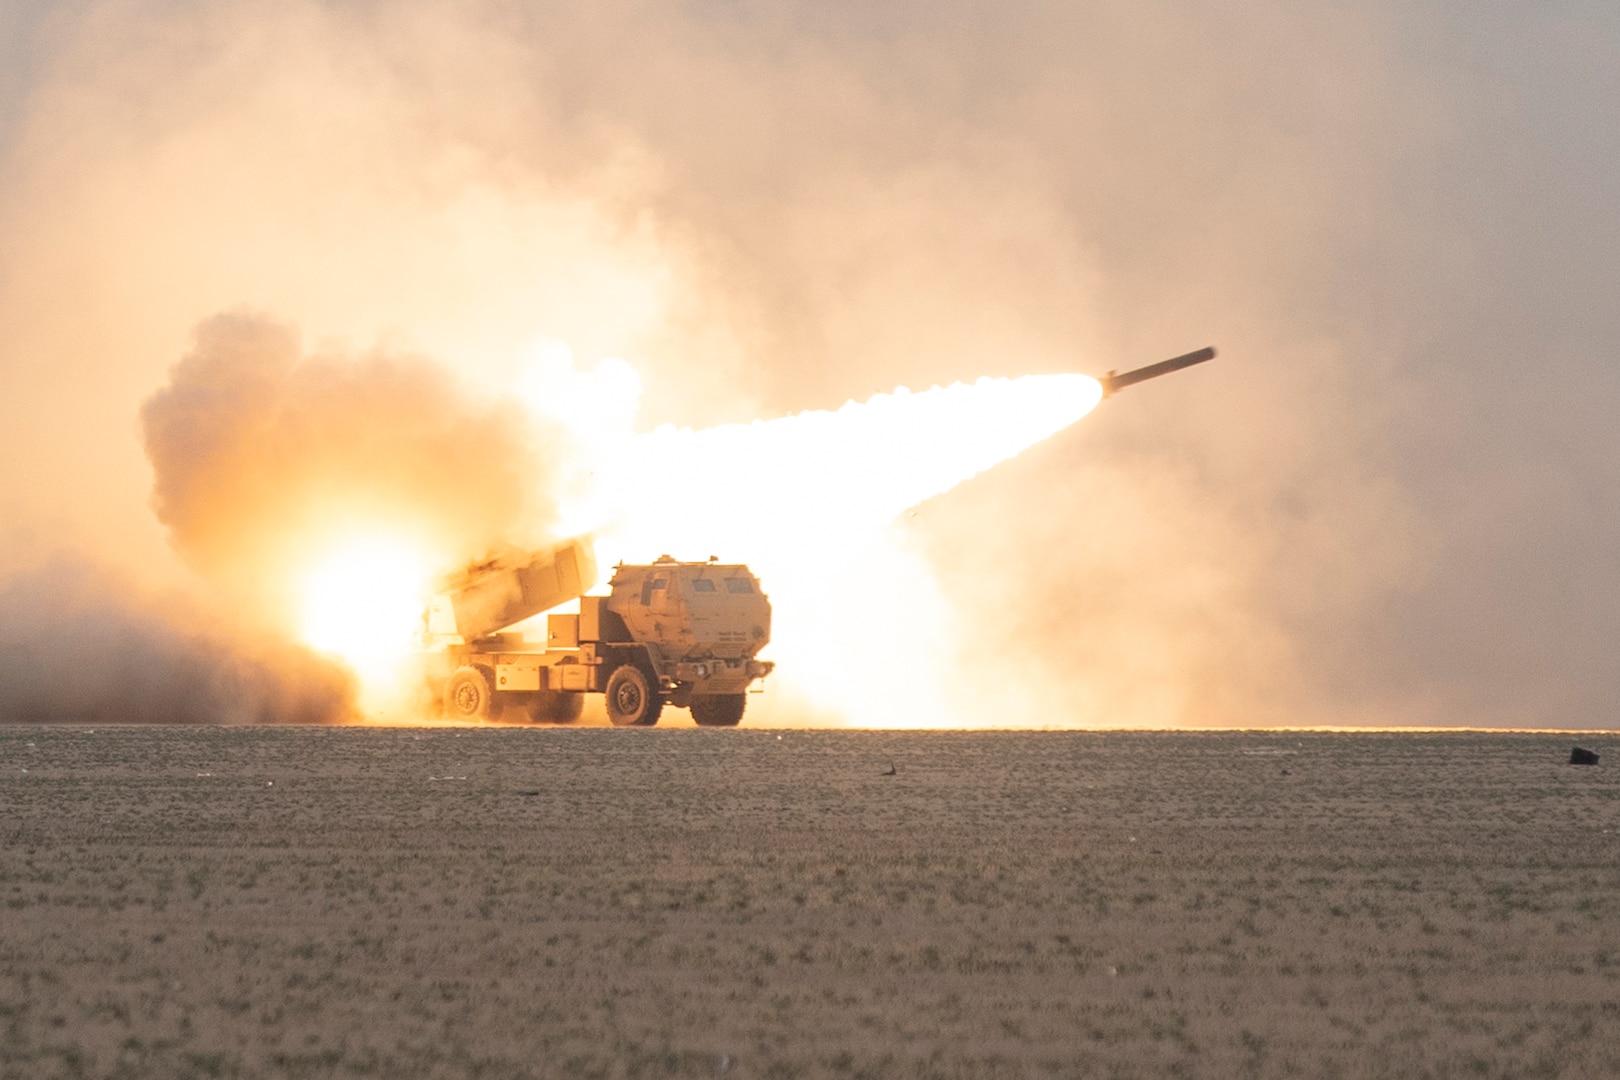 High Mobility Artillery Rocket System Soldiers with 4th Battalion, 133rd Field Artillery Regiment, Texas Army National Guard supported Task Force Spartan, fire a rocket from their guided multiple rocket launch systems during the Dasman Shield exercise, Sunday, Feb. 23, 2020, at Udairi Range in northwestern Kuwait.